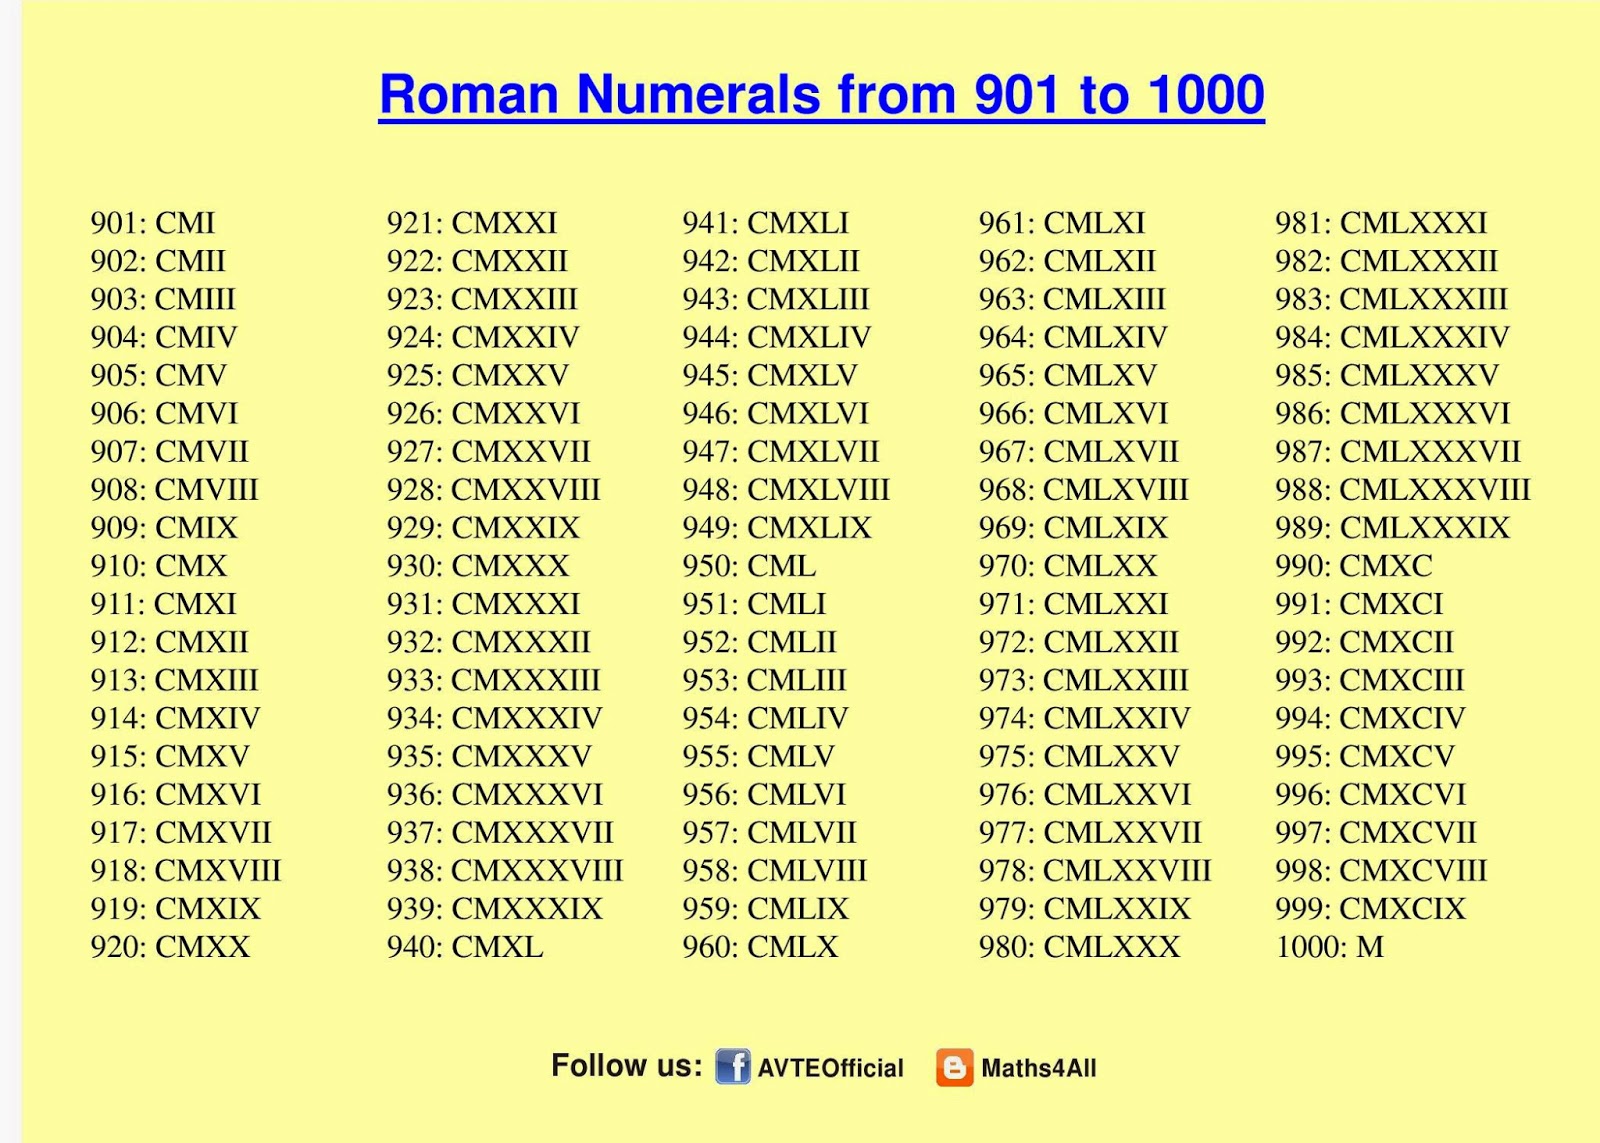 Maths4all: ROMAN NUMERALS 901 TO 1000